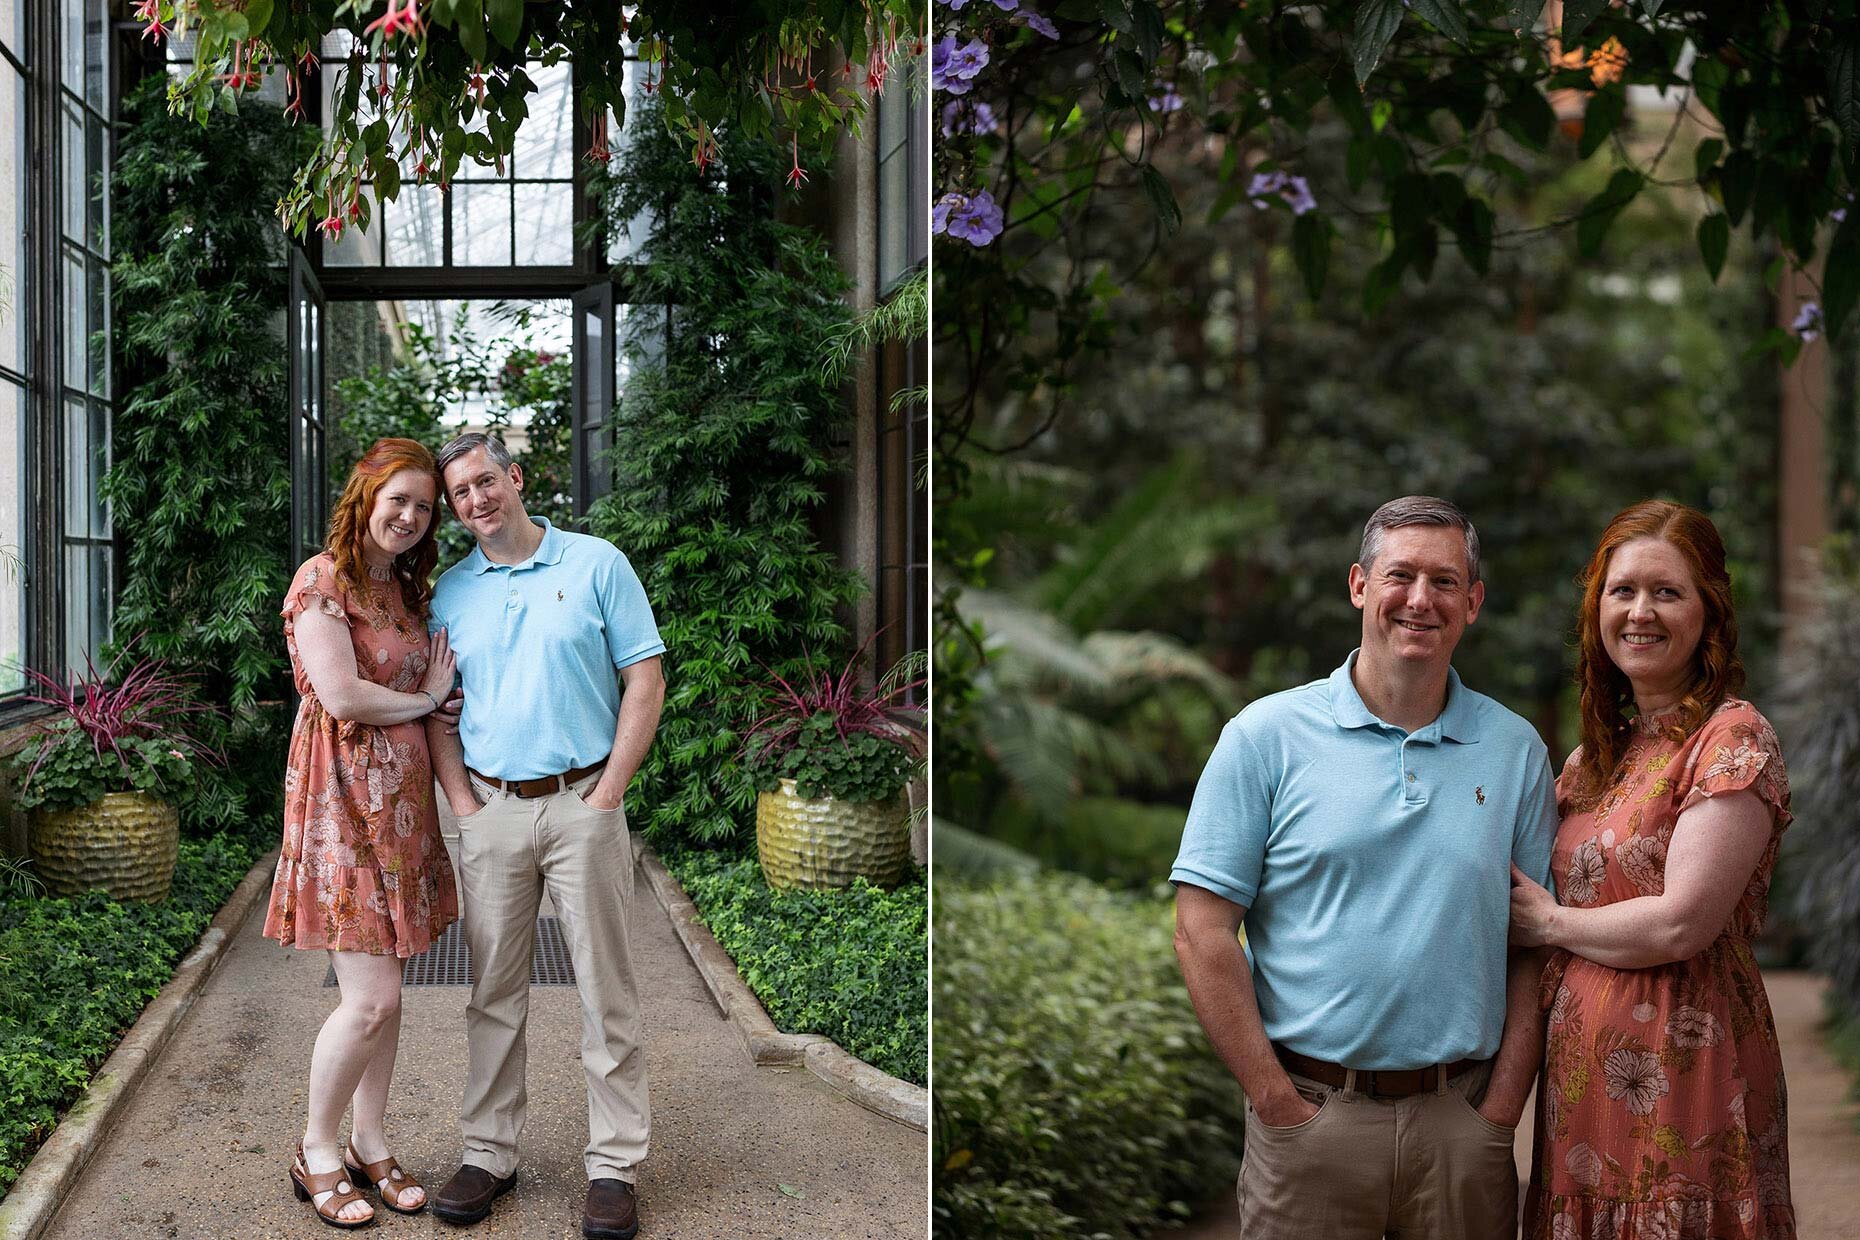 Mary &amp; Dan at the Conservatory Greenhouse at Longwood Gardens Kennett Square, PA with lots of Greenery